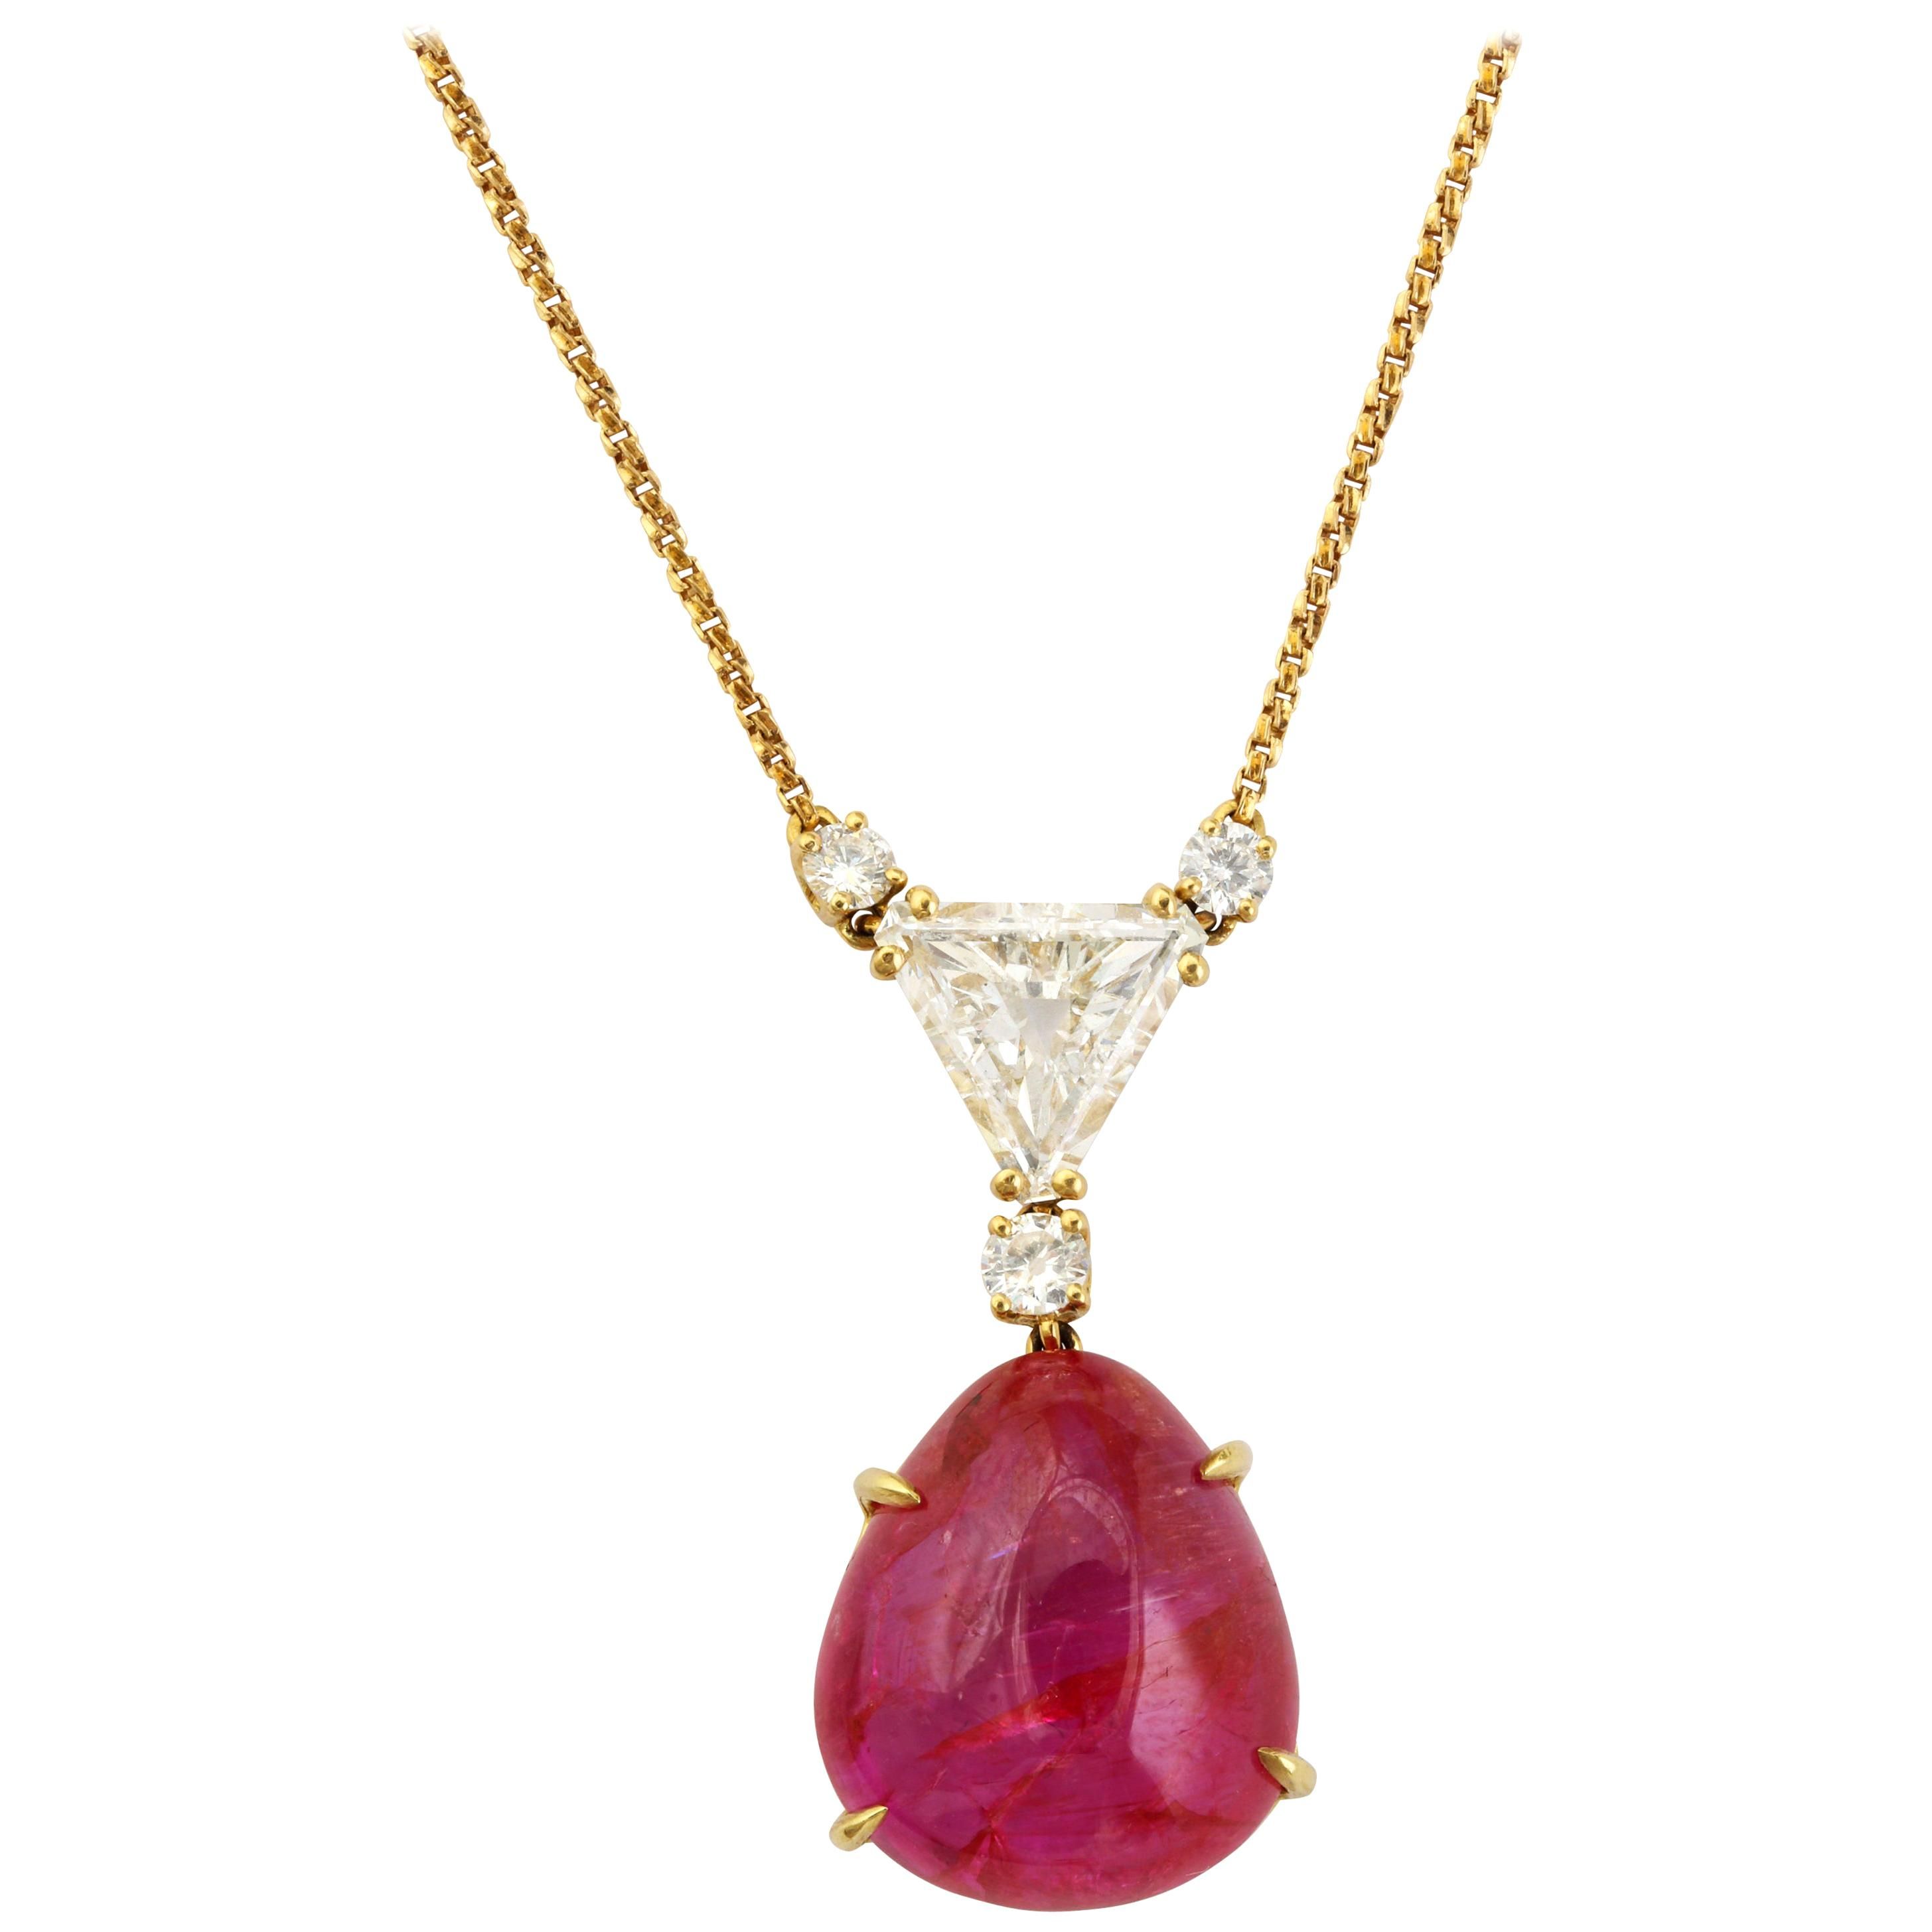 Antique Ruby Necklaces – 1,240 For Sale At 1stdibs In Most Up To Date July Droplet Pendant, Synthetic Ruby Necklaces (View 23 of 25)